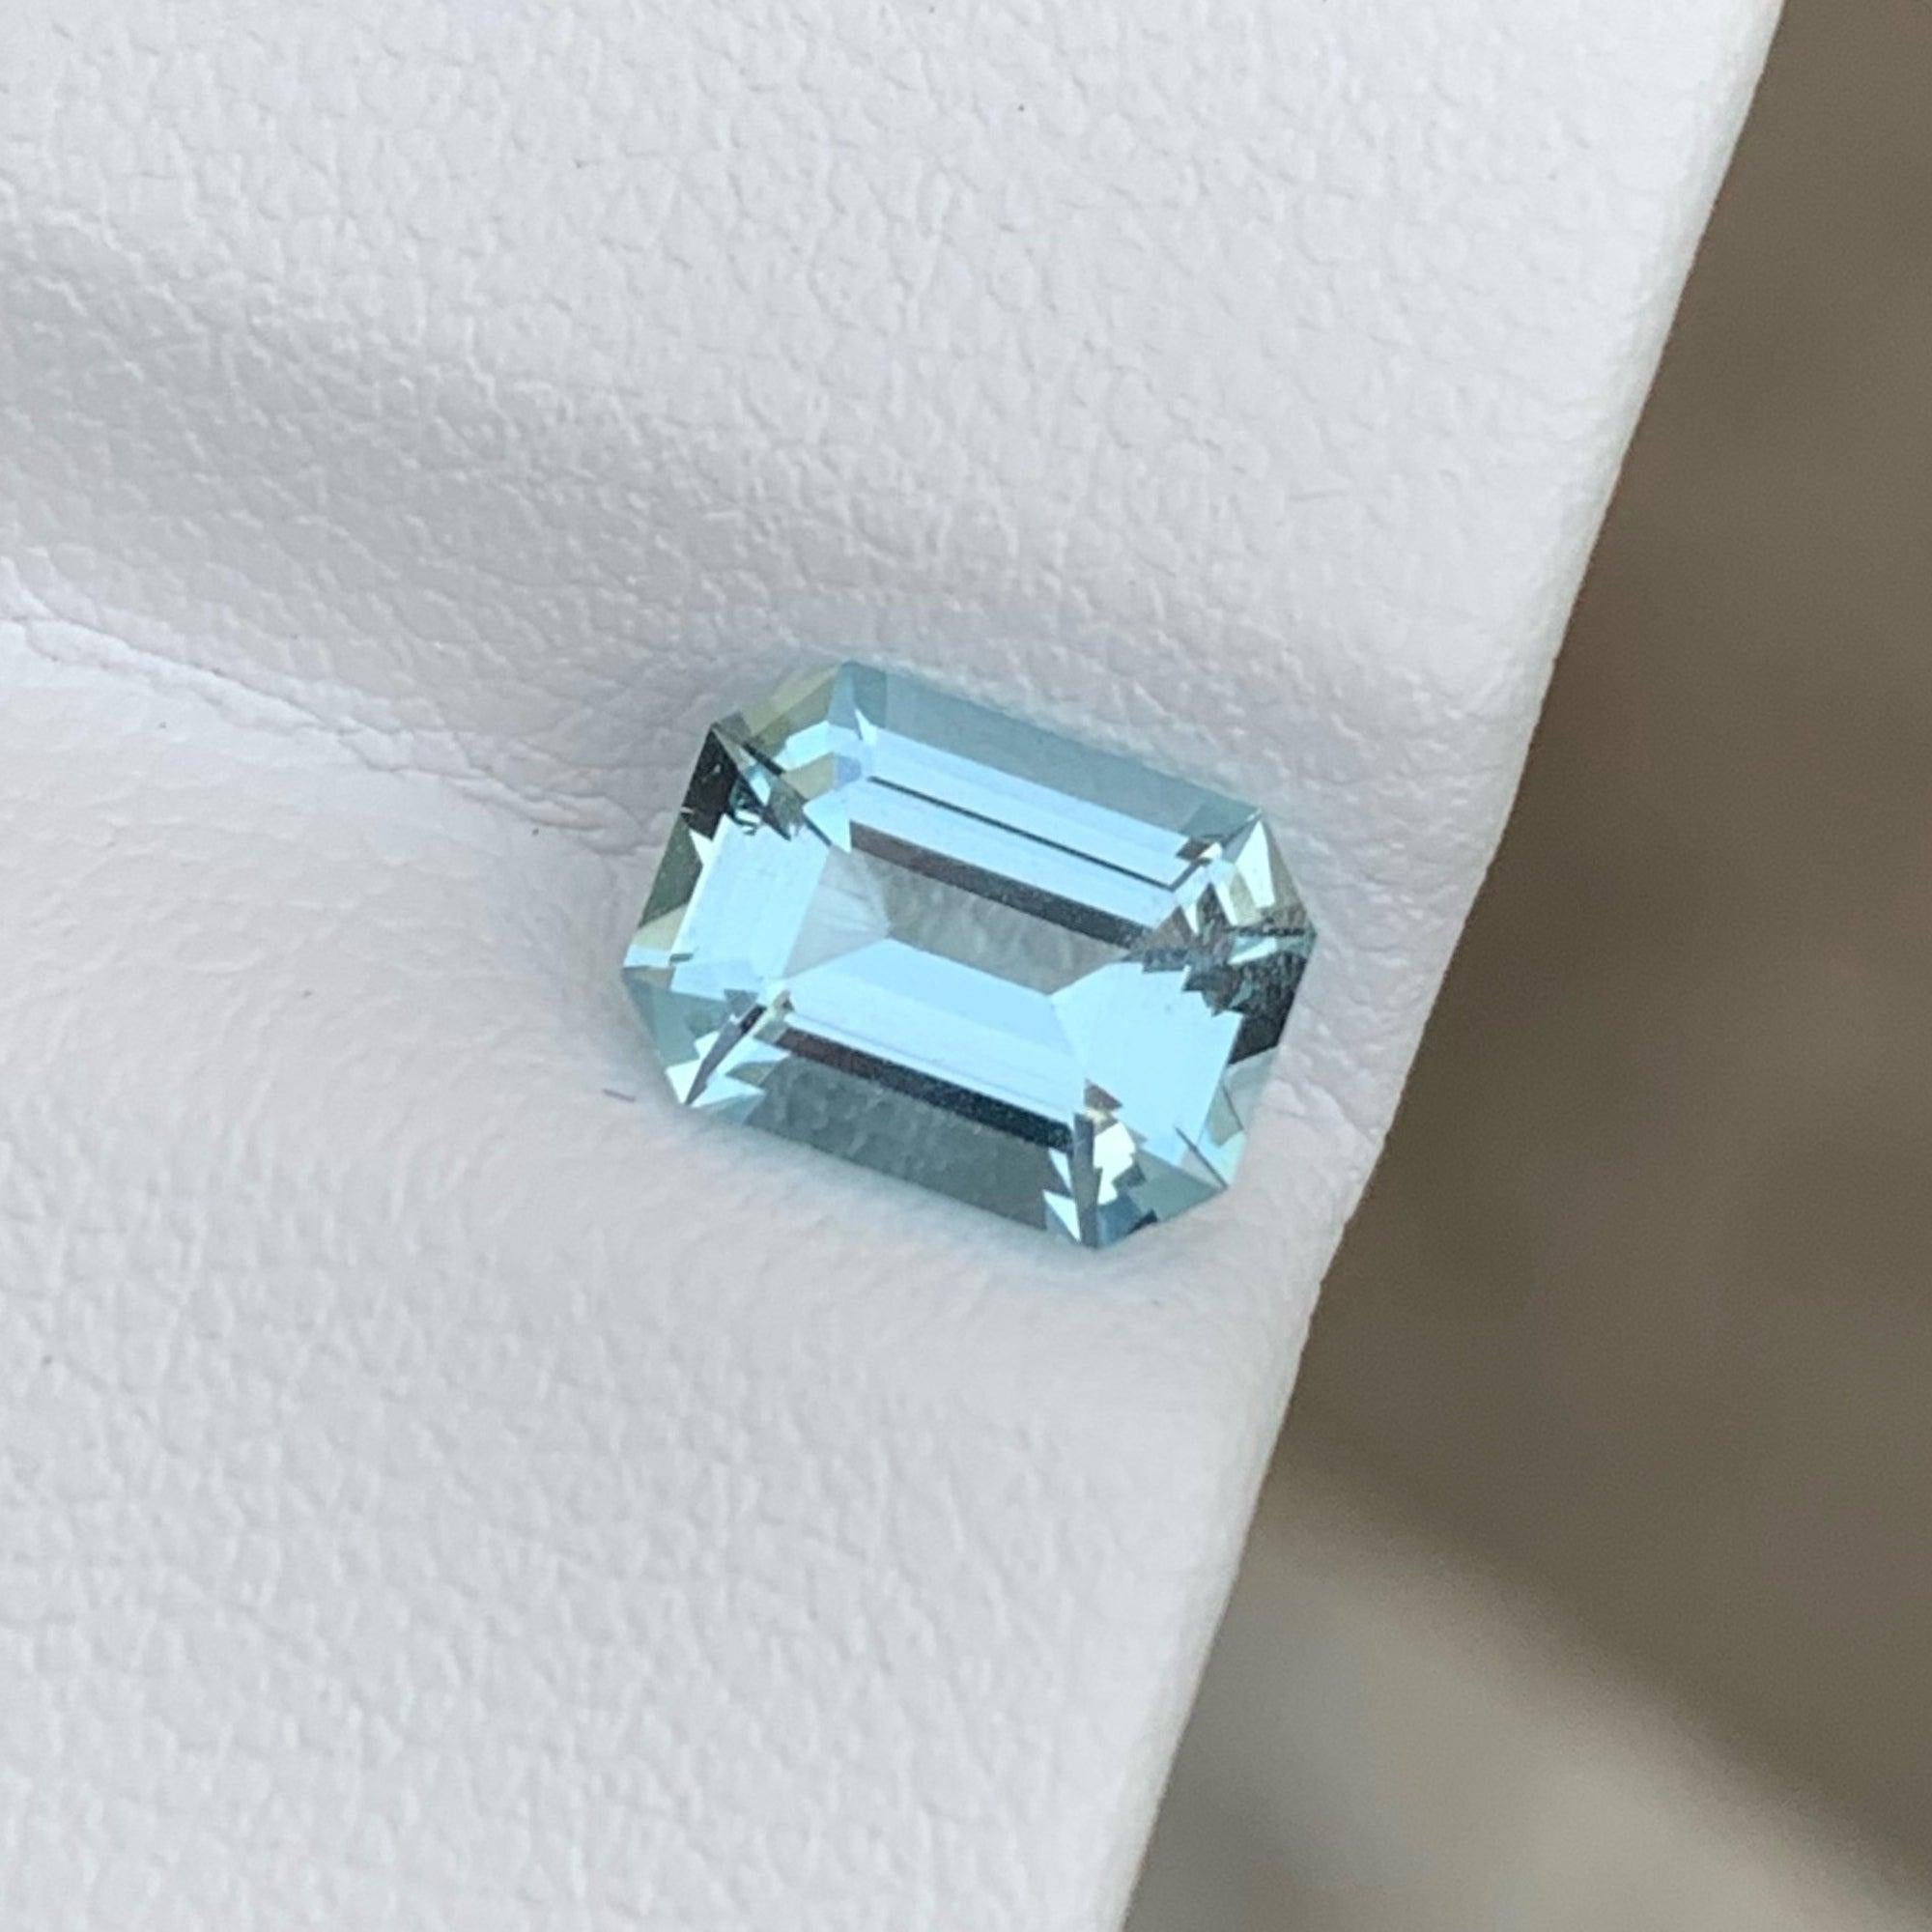 Natural Aquamarine stone, available for sale at wholesale price natural high quality 1.30 Carats Loupe Clean Clarity Loose Aquamarine from Pakistan.

Product Information:
GEMSTONE NAME: Exceptional Aquamarine Cut Gemstone
WEIGHT:	1.30